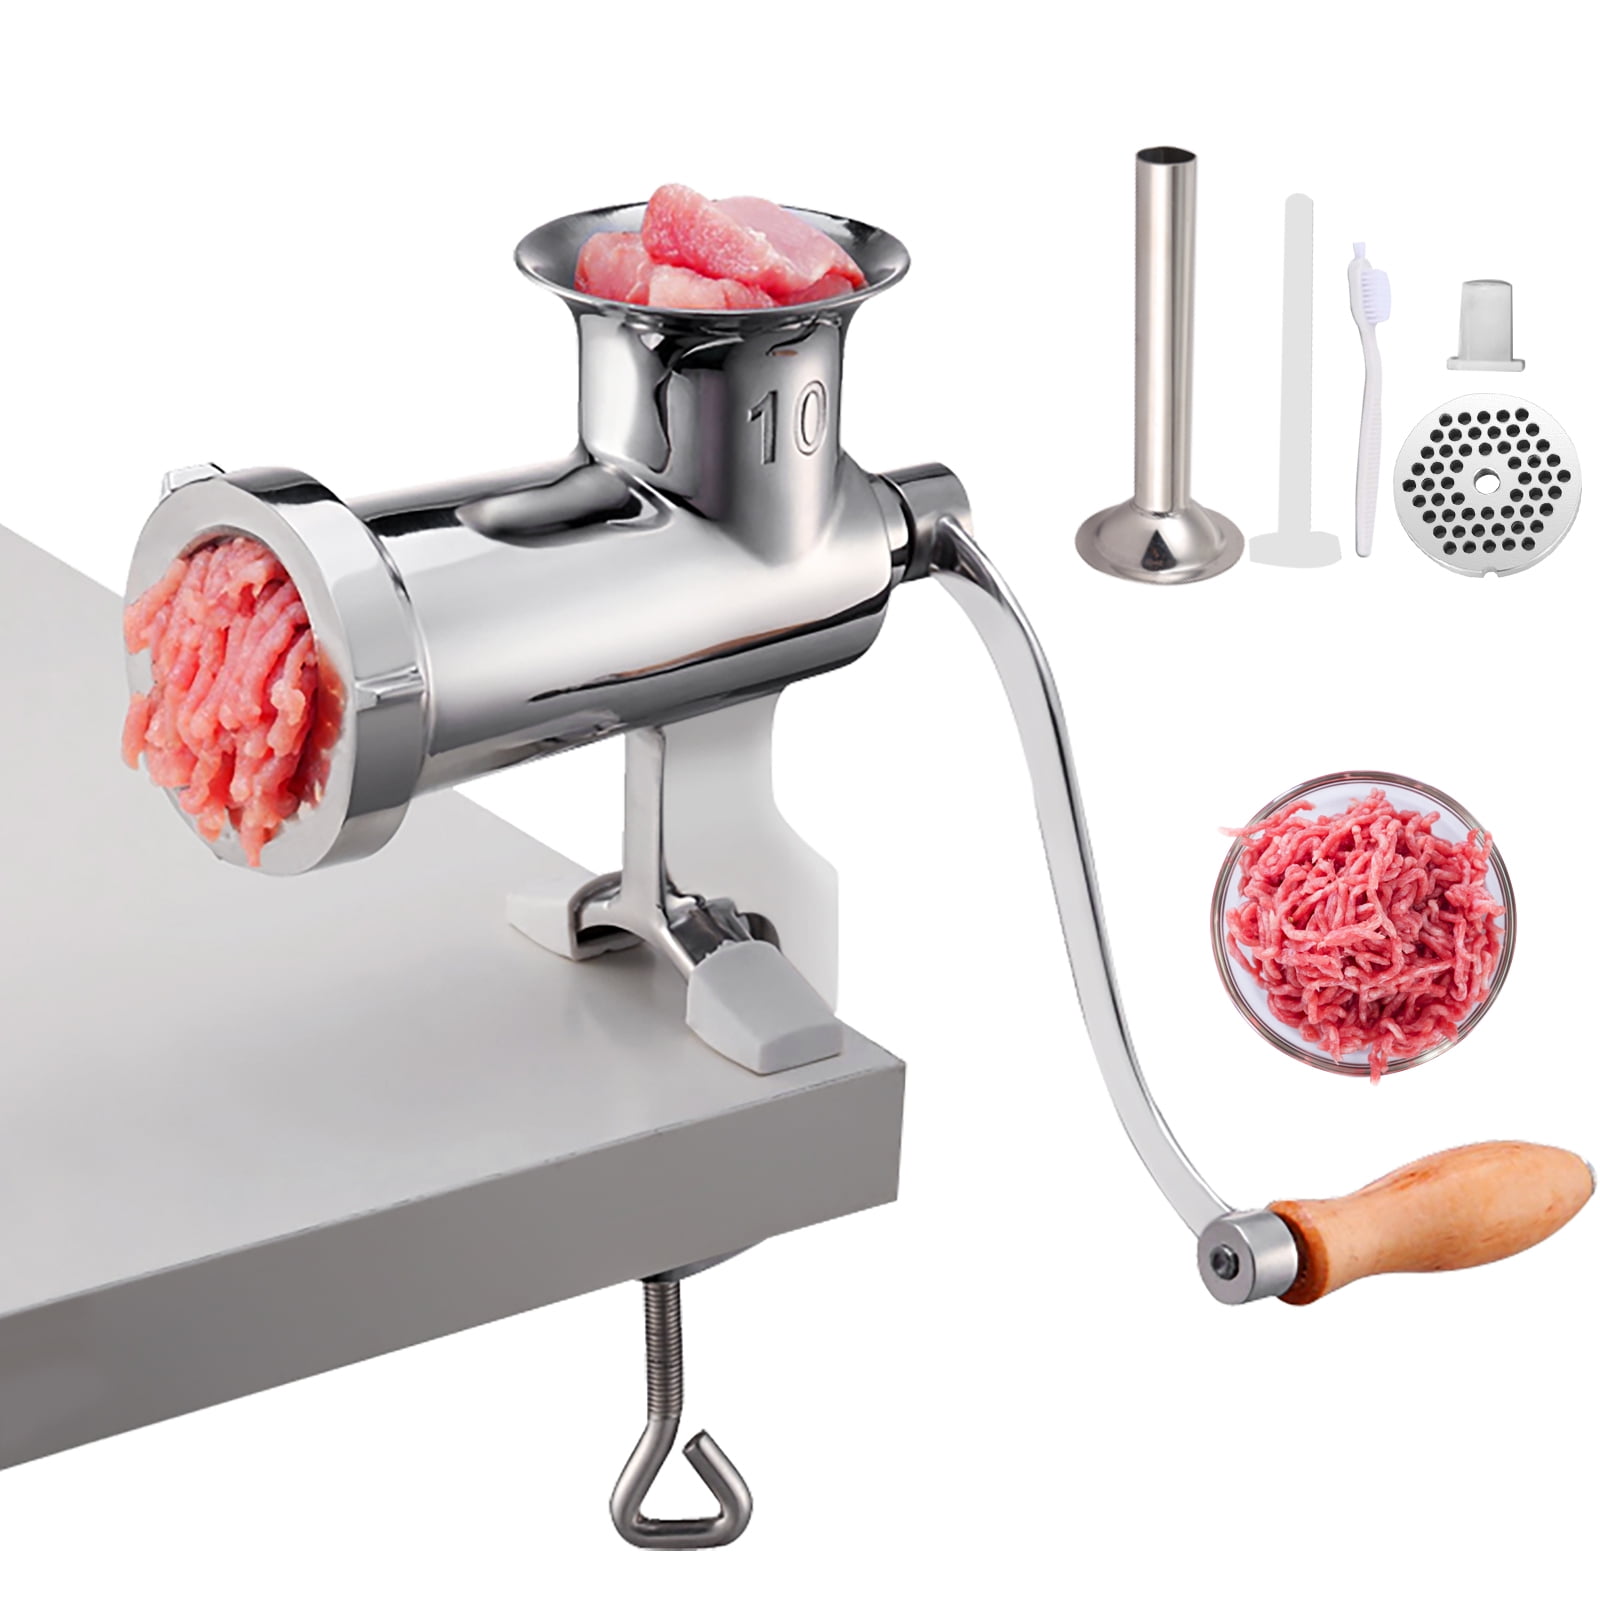 VEVORbrand Commercial Electric Meat Grinder, 550lbs & 1100W Commercial  Sausage Stuffer Maker, 220 RPM 1.5HP Stainless Steel Food Grinders for